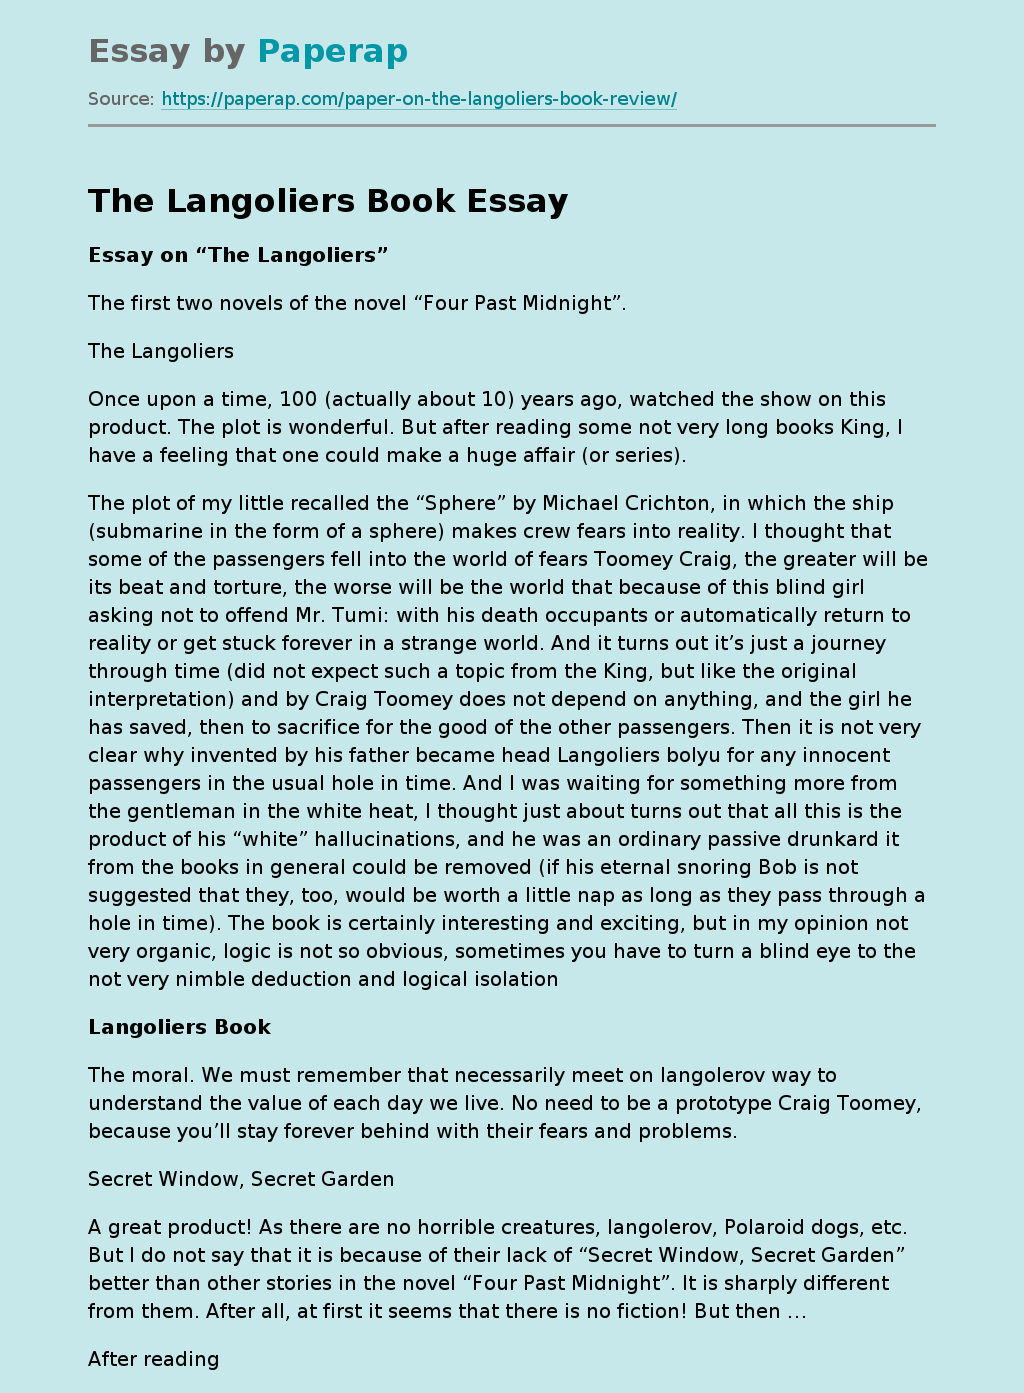 The Langoliers Book